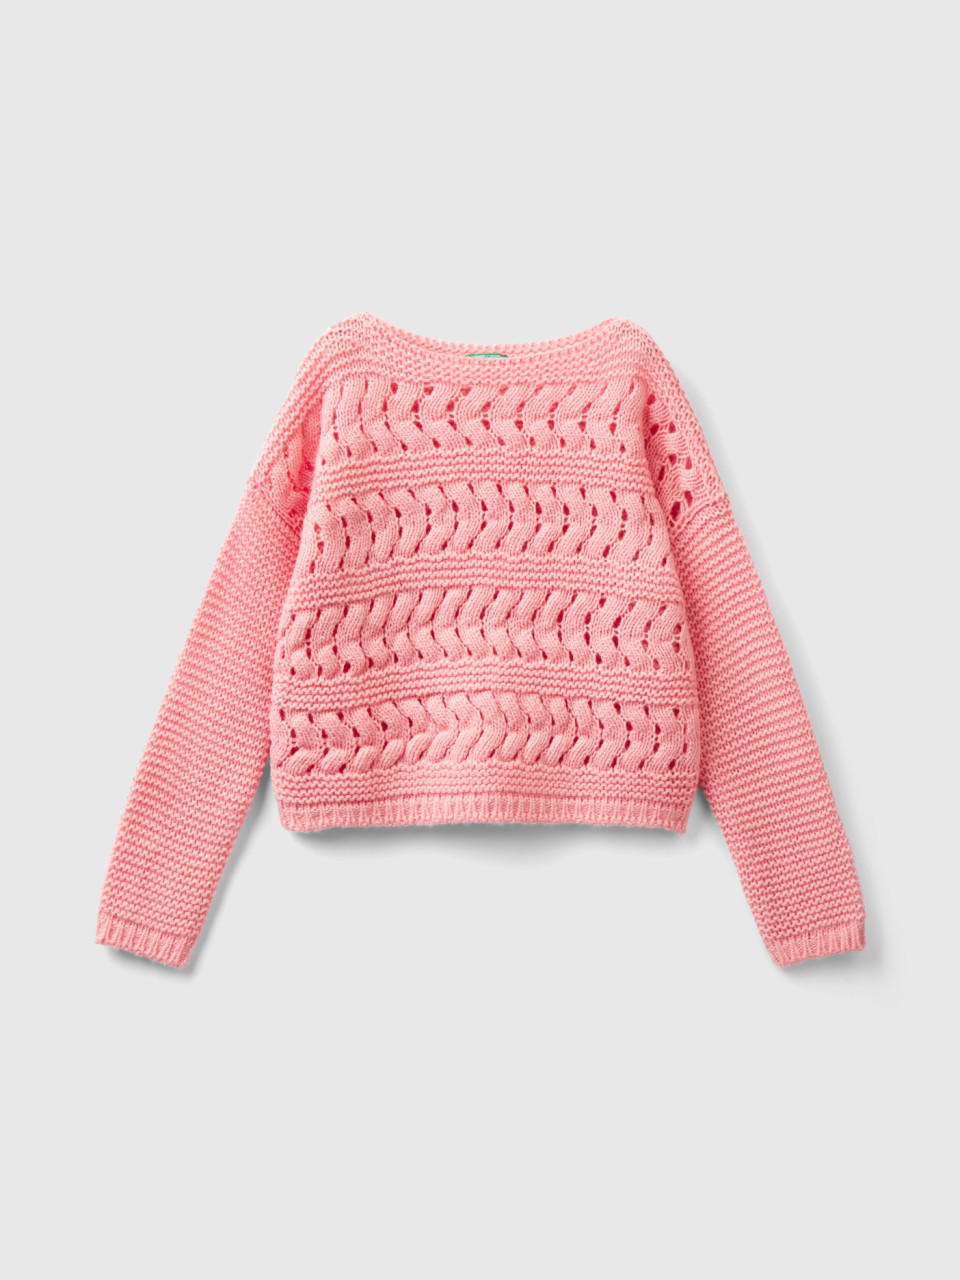 Benetton, Cable Knit Sweater In Wool Blend, Pink, Kids